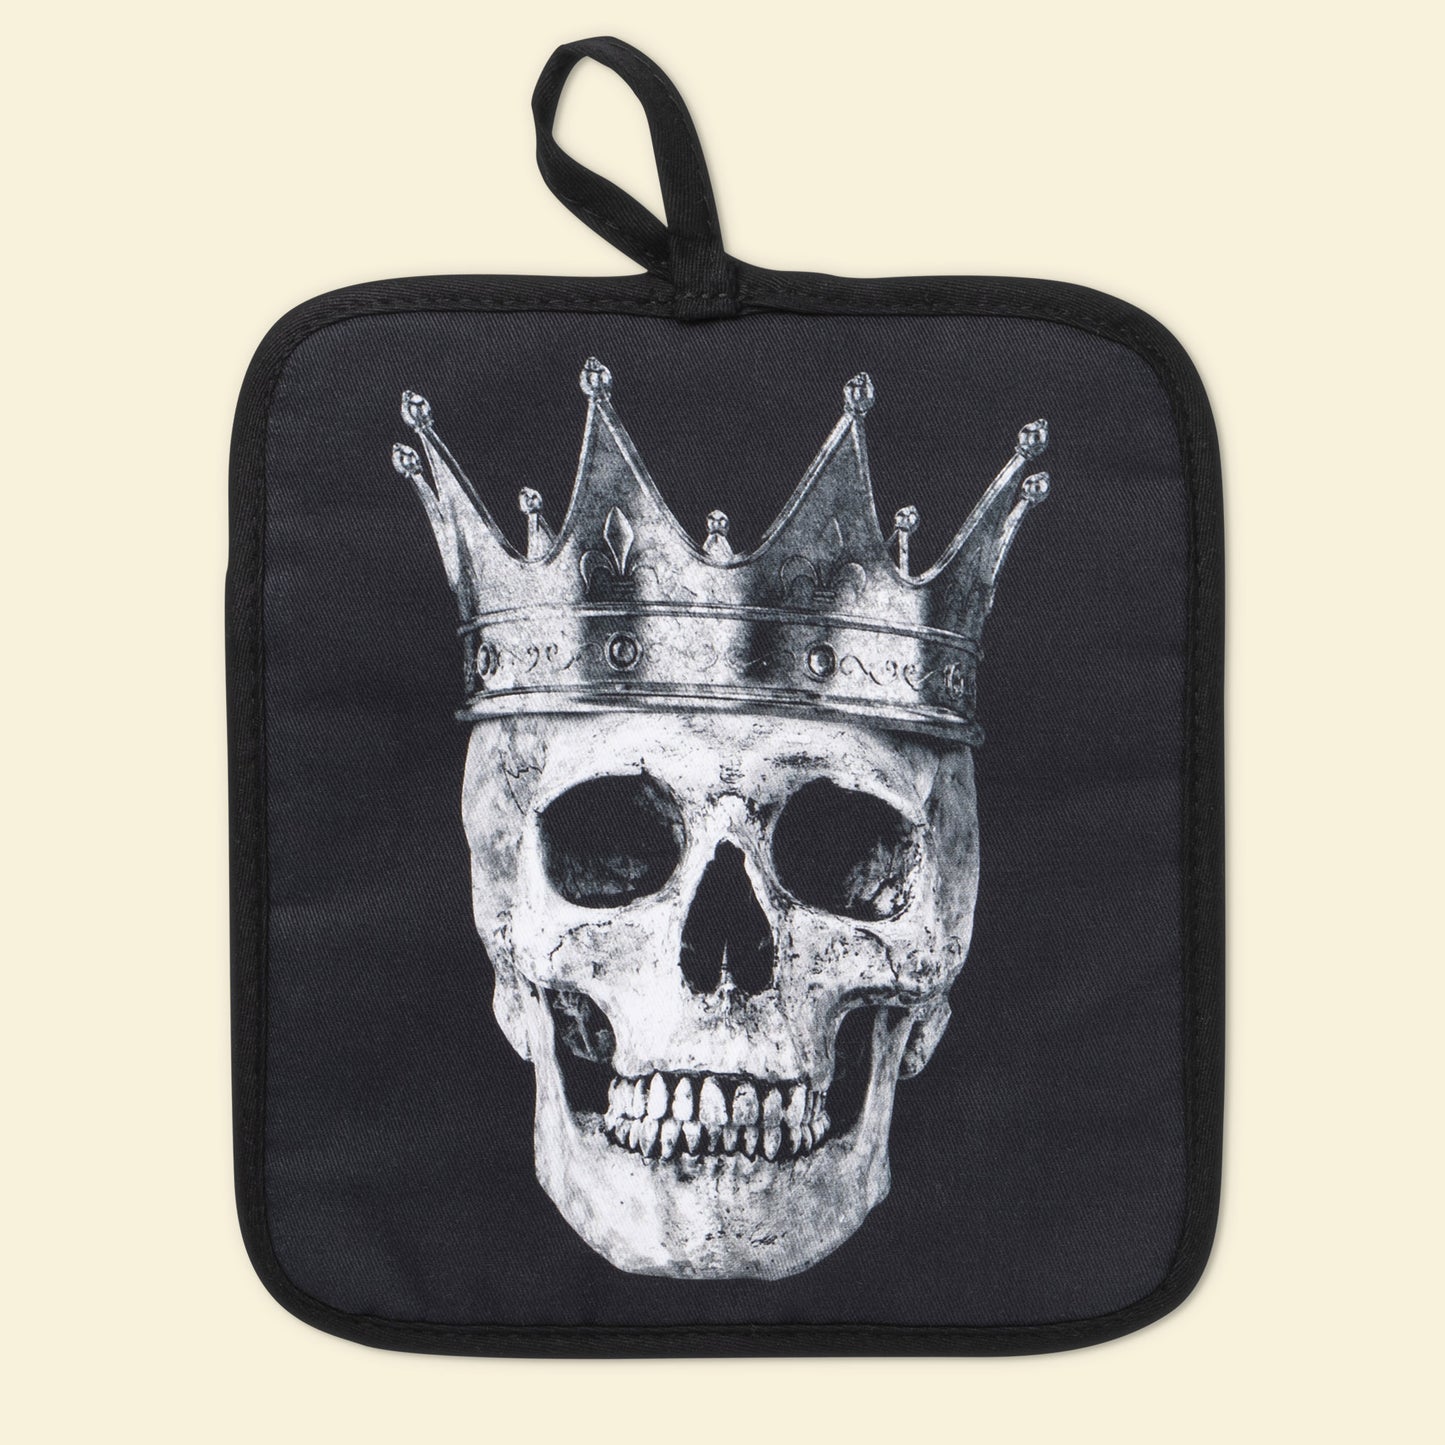 King And Queen Black Skull Oven Mitts And Potholder Set